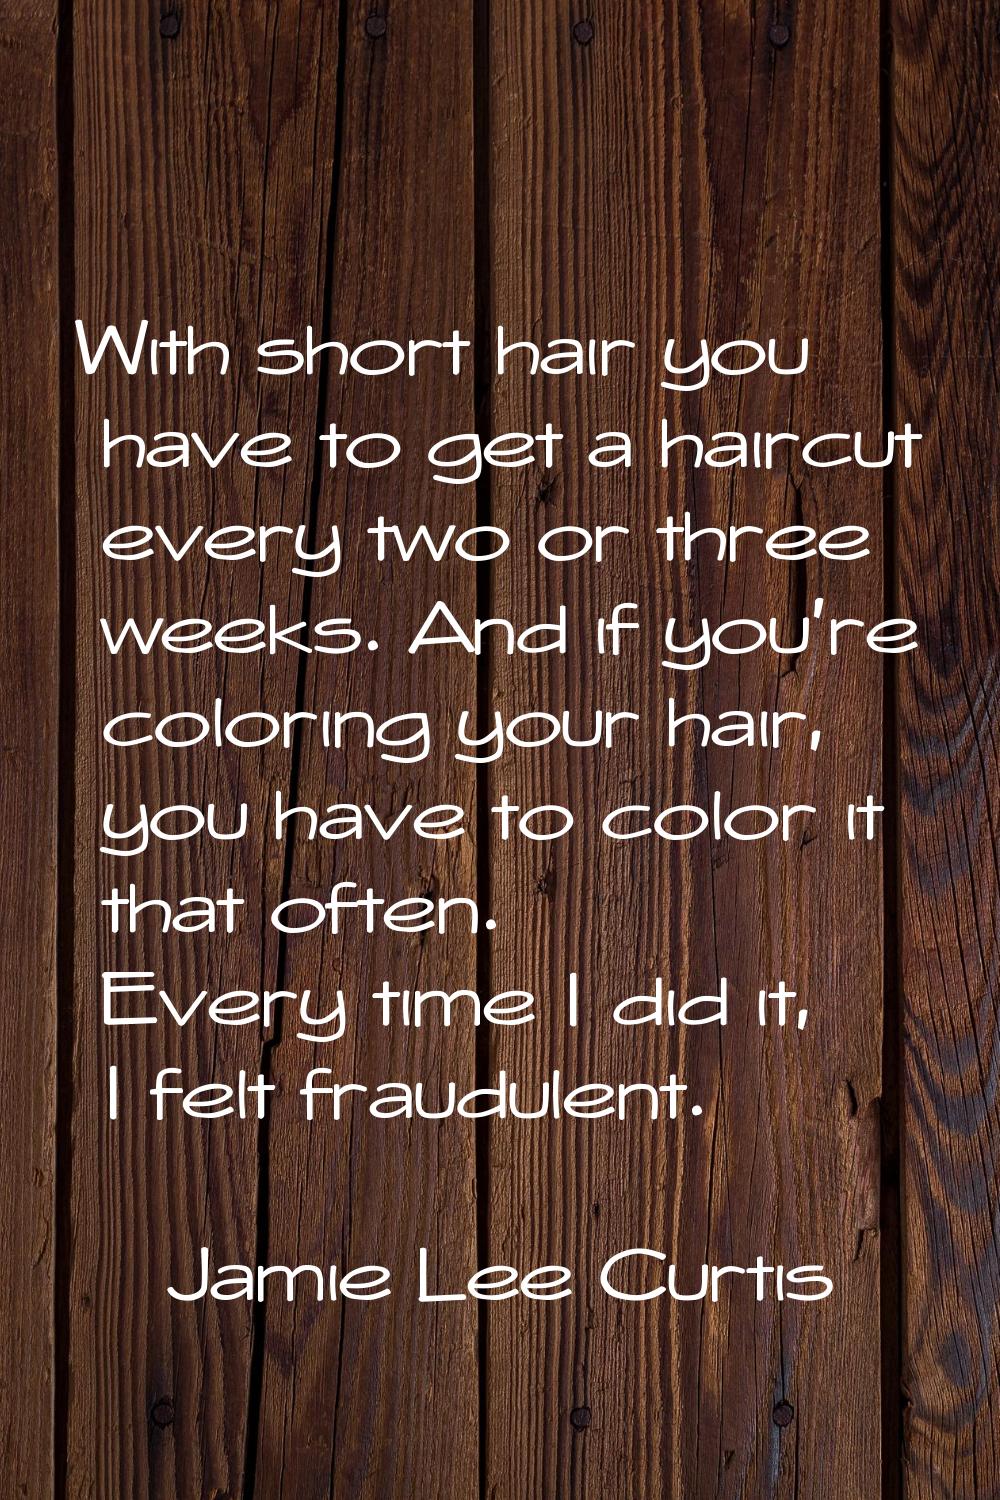 With short hair you have to get a haircut every two or three weeks. And if you're coloring your hai